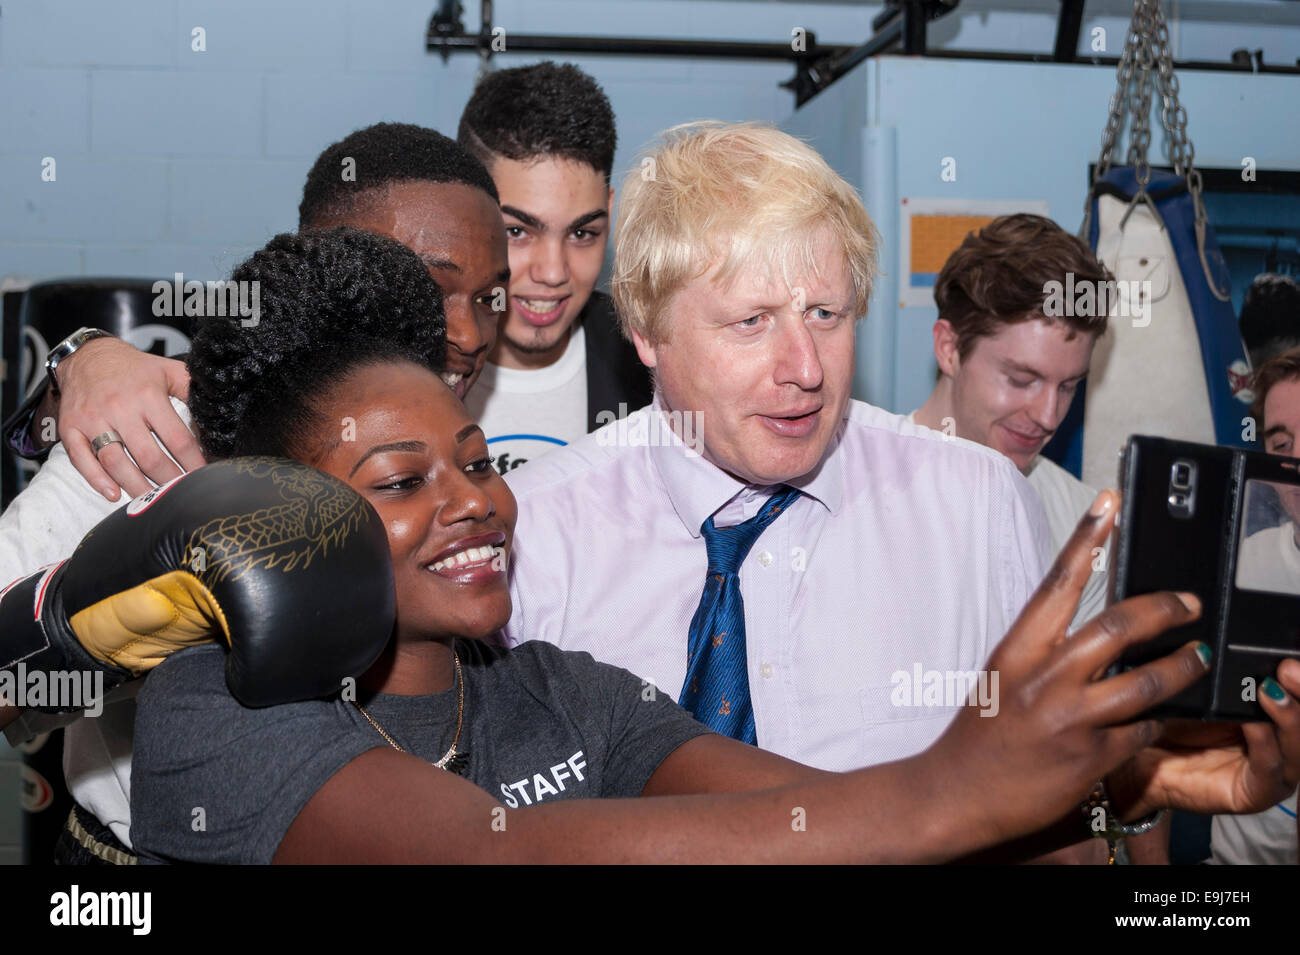 London, UK. 28th October, 2014. The Mayor of London, Boris Johnson visited a training session at Fight for Peace Academy in North Woolwich, Newham where he met some of the young people being helped by the charity. Fight for Peace uses boxing and martial arts combined with education and personal development to realise the potential of young people in the borough at risk of crime and violence.  First established in Rio in 2000 by Luke Dowdney MBE, it was replicated in Newham in 2007and is now expanding globally.  Pictured : the Mayor poses for selfies.   Credit:  Stephen Chung/Alamy Live News Stock Photo